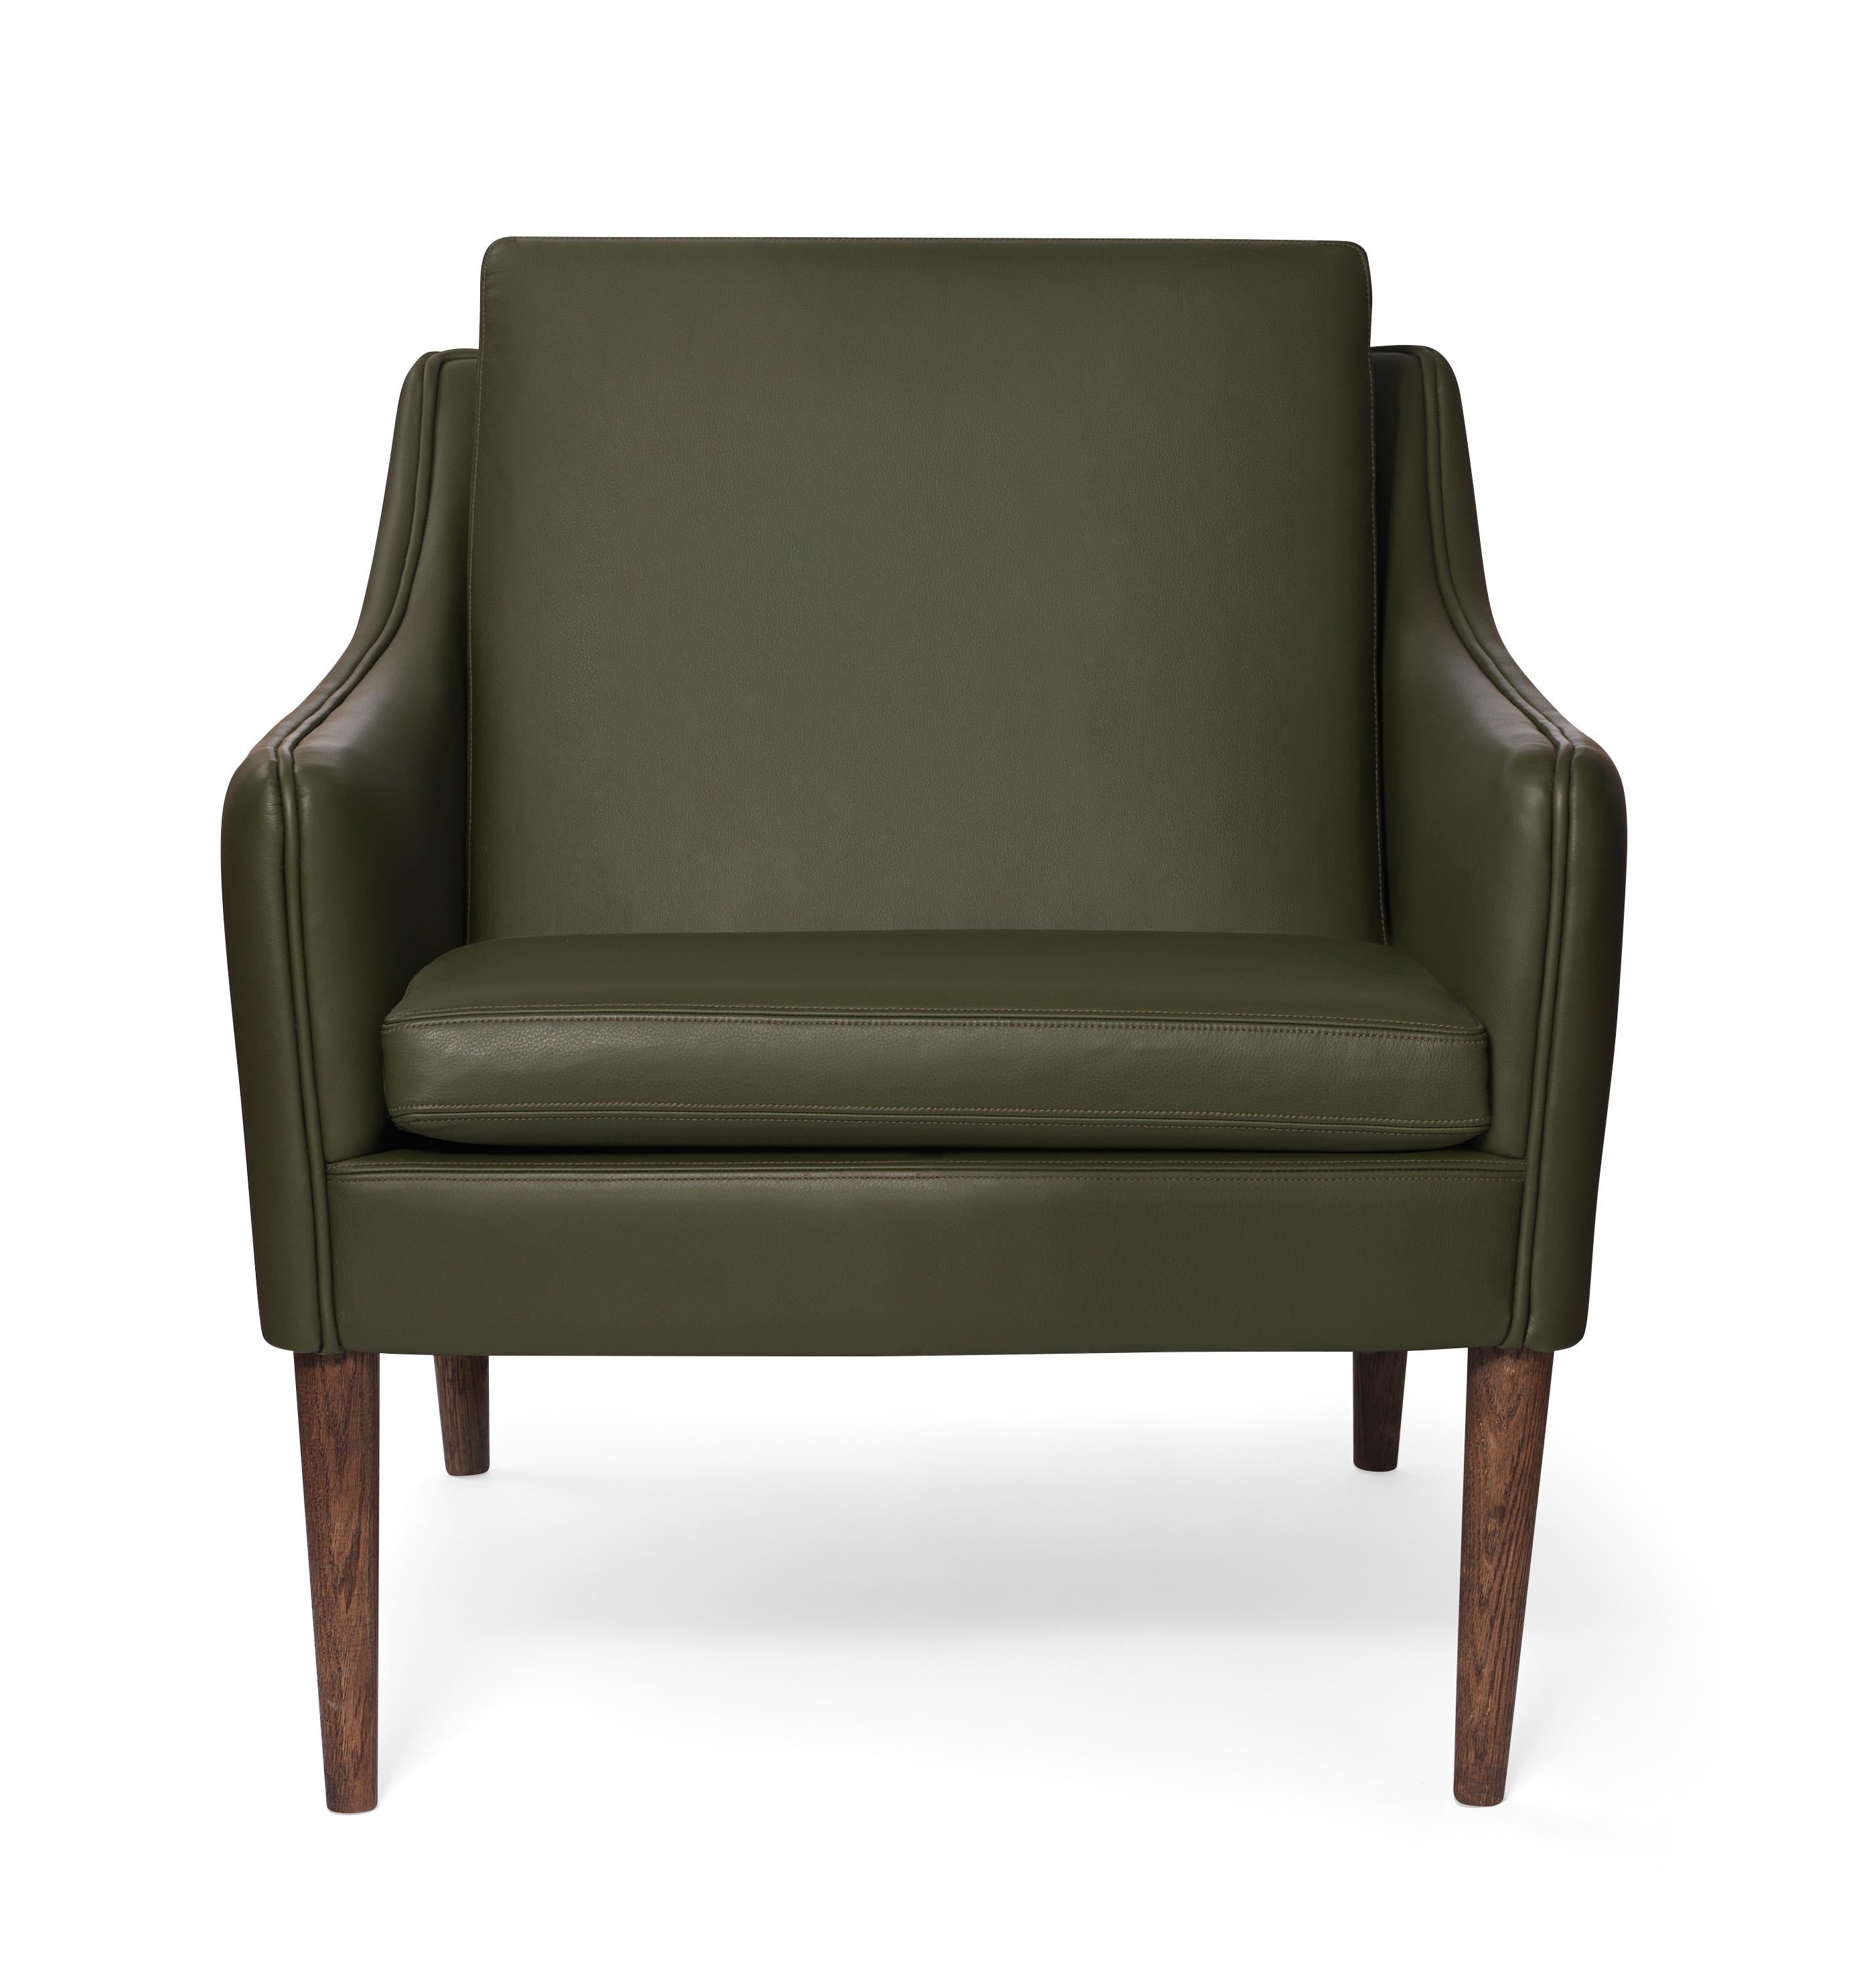 For Sale: Green (Challenger Pickle green) Mr. Olsen Lounge Chair with Smoked Legs, by Hans Olsen from Warm Nordic